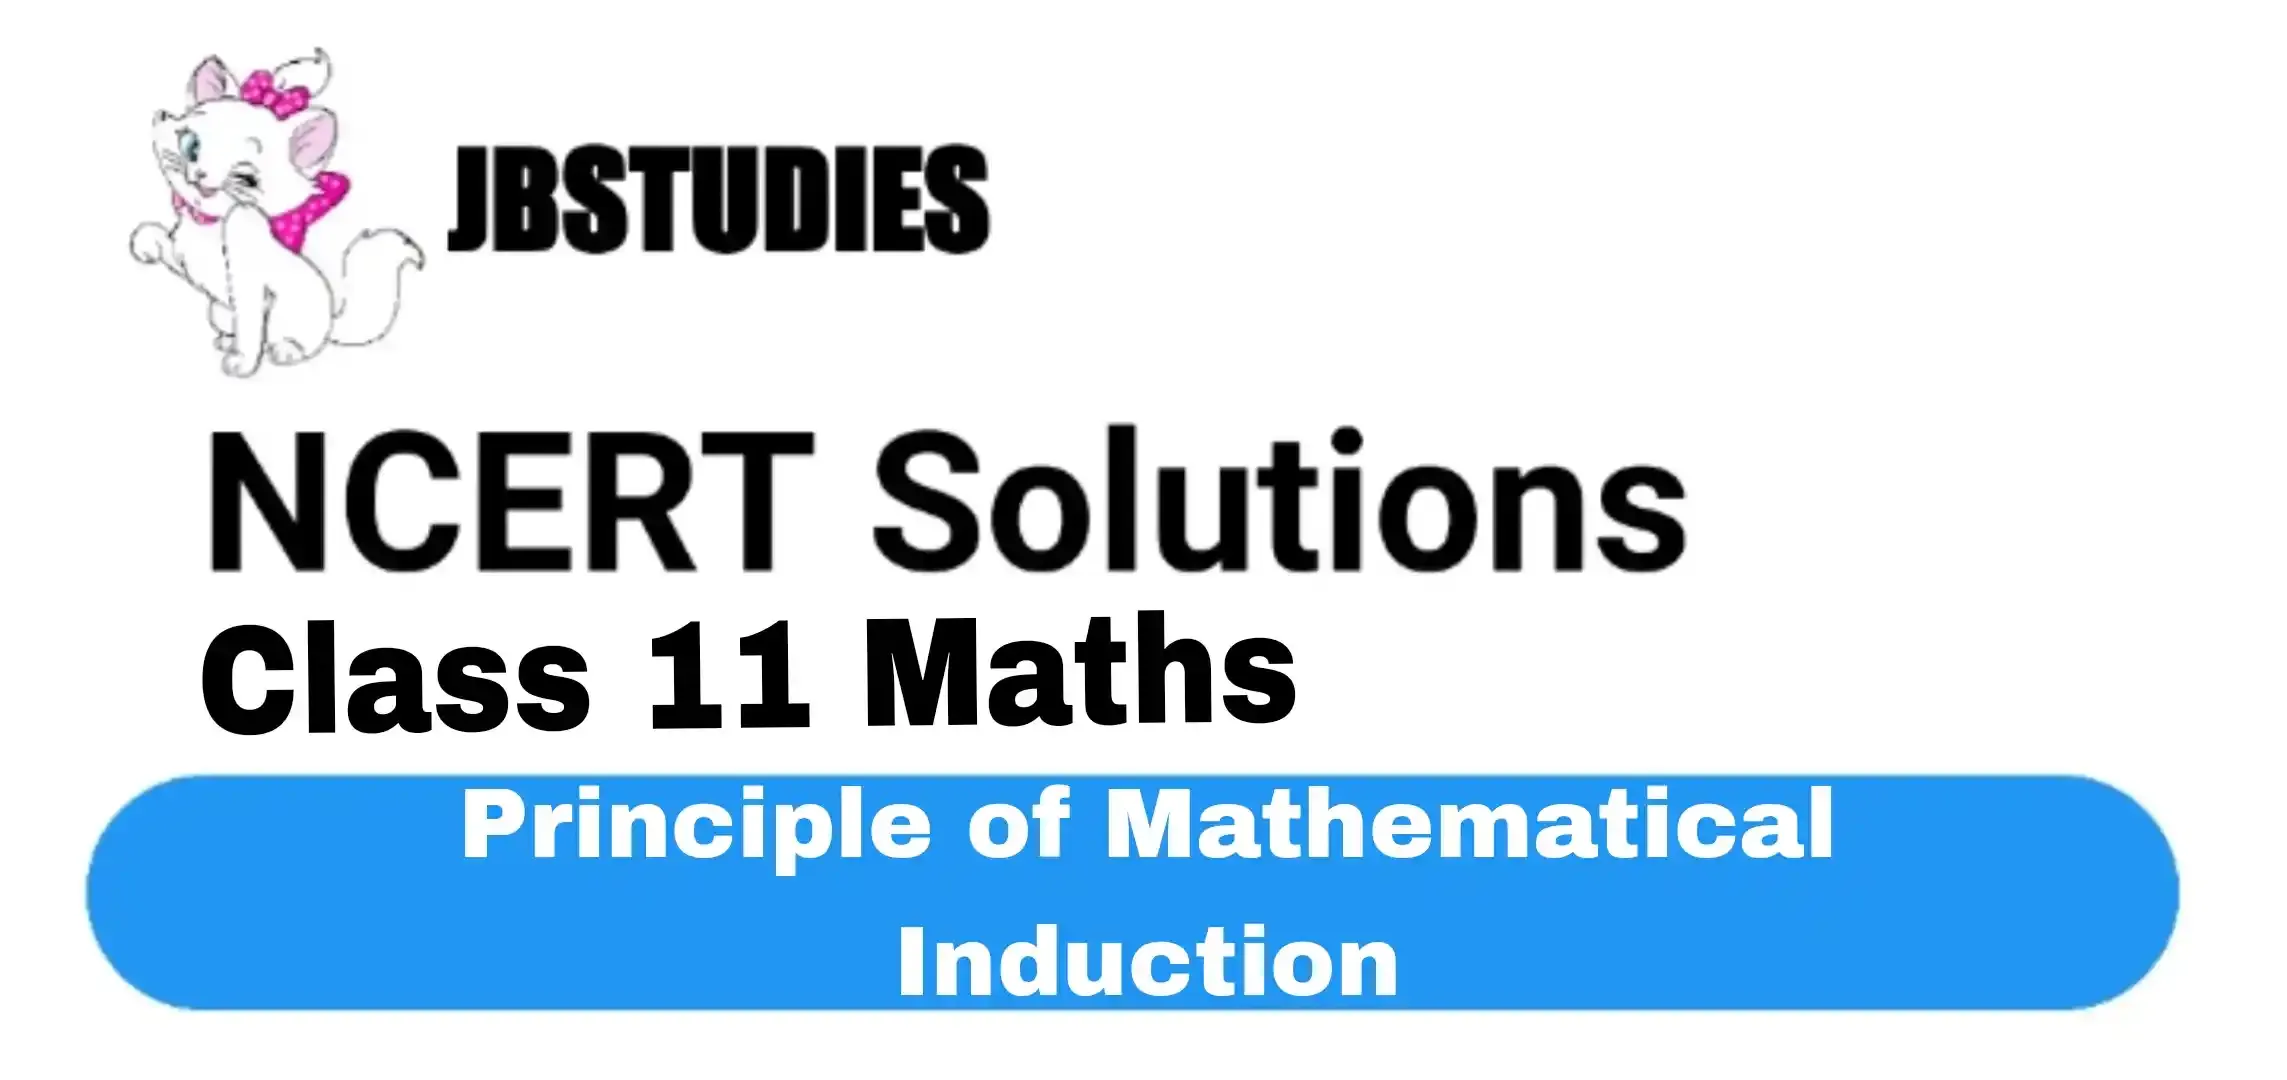 Solutions Class 11 Maths Chapter-4 (Principle of Mathematical Induction)